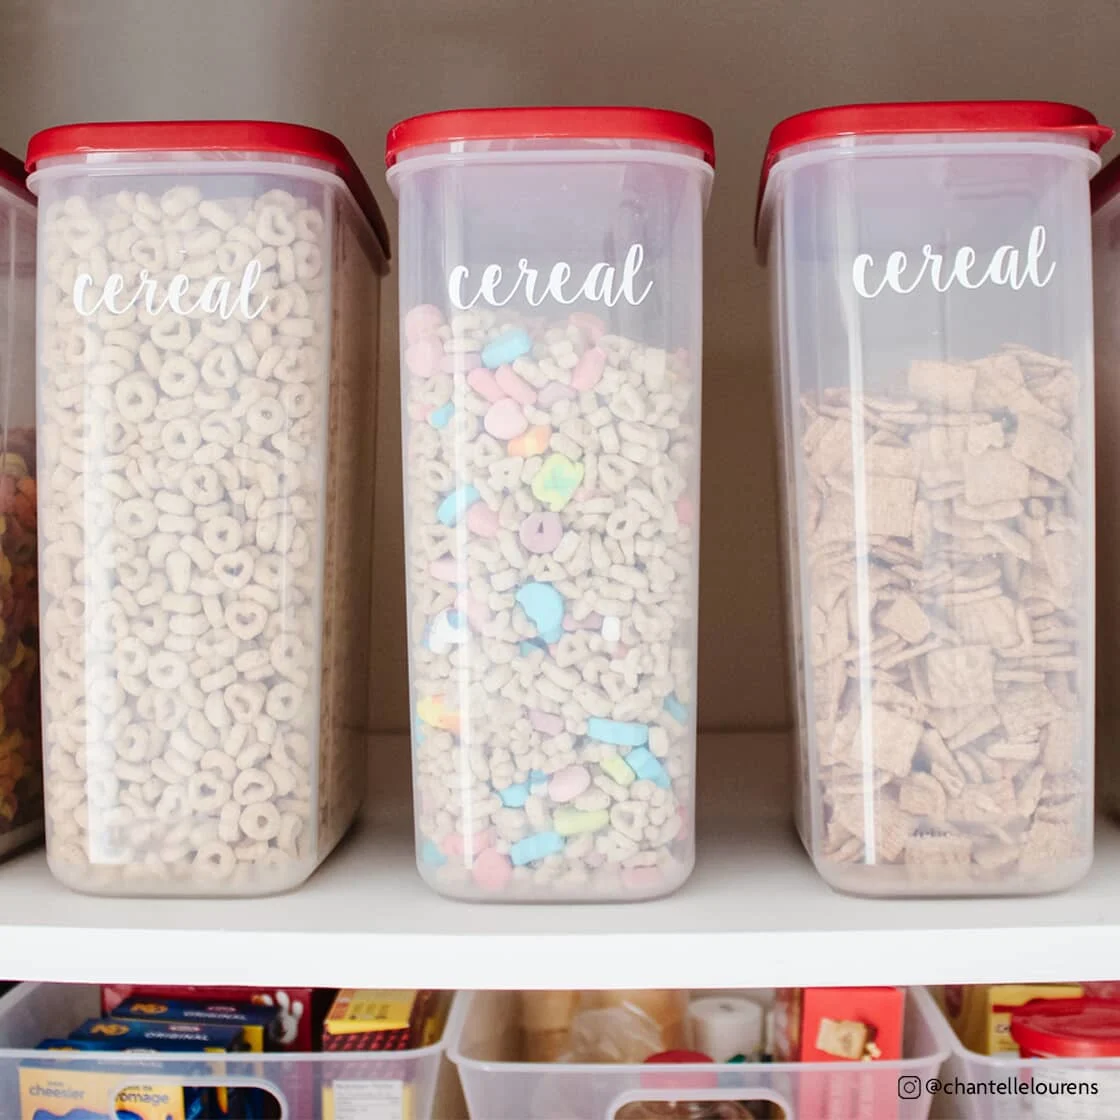 Cereal containers